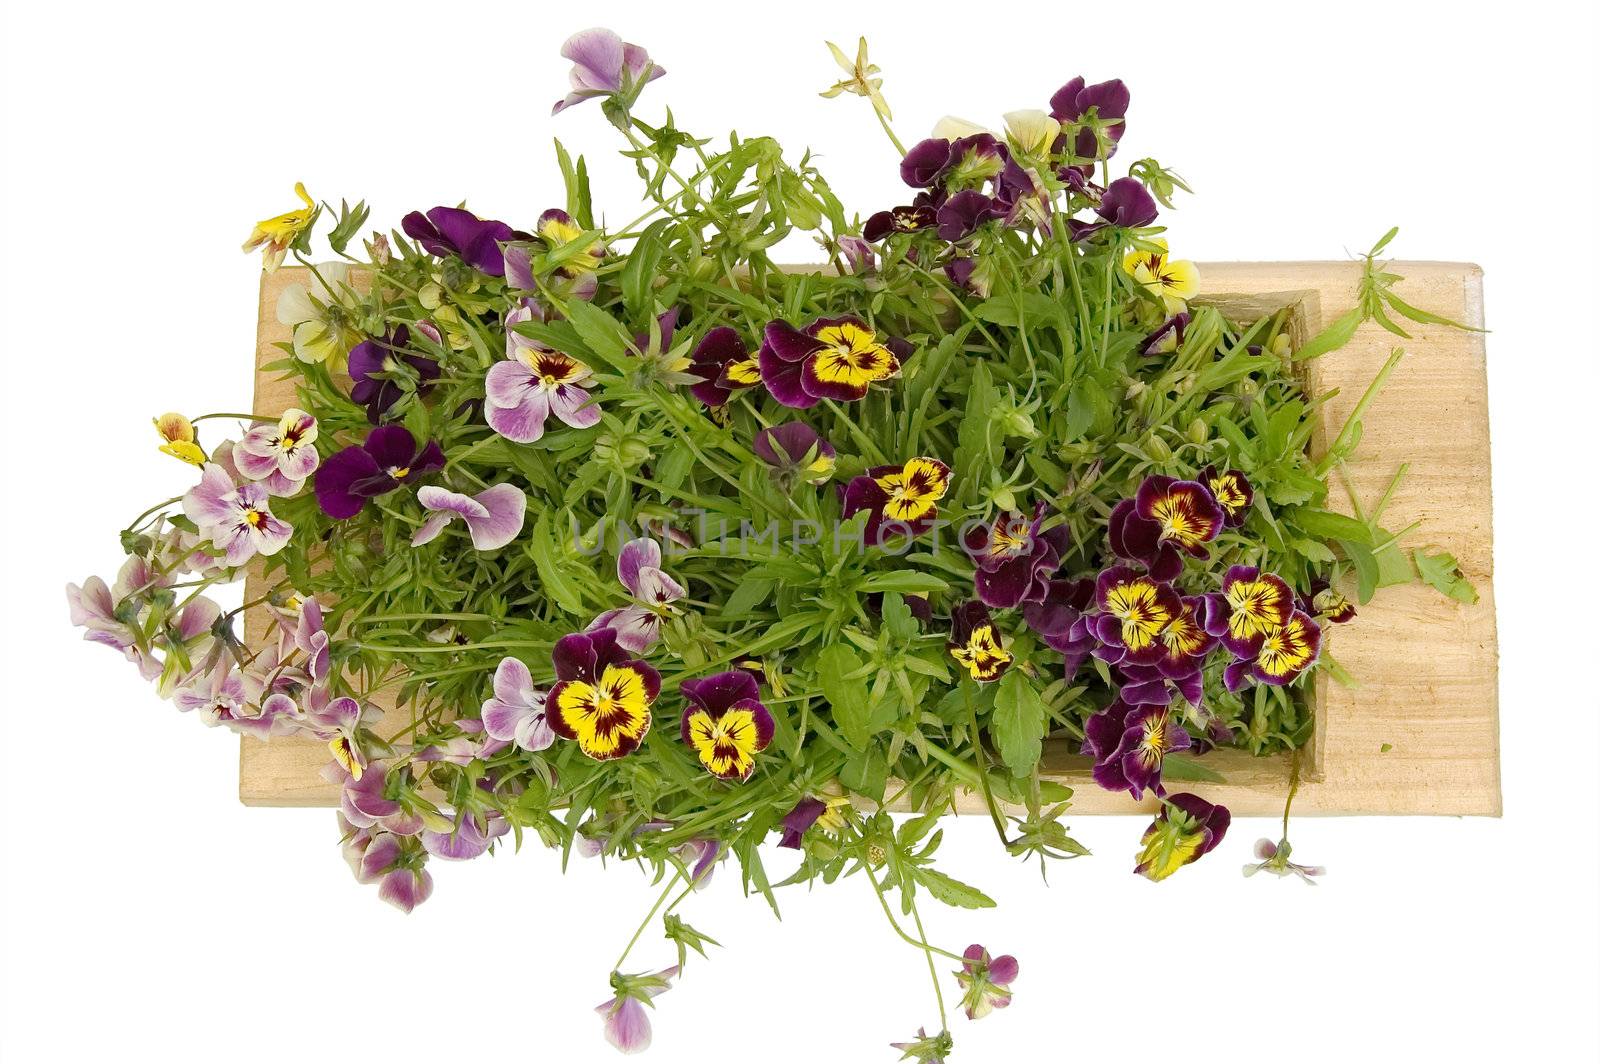 A wooden tray with pansies by rezkrr